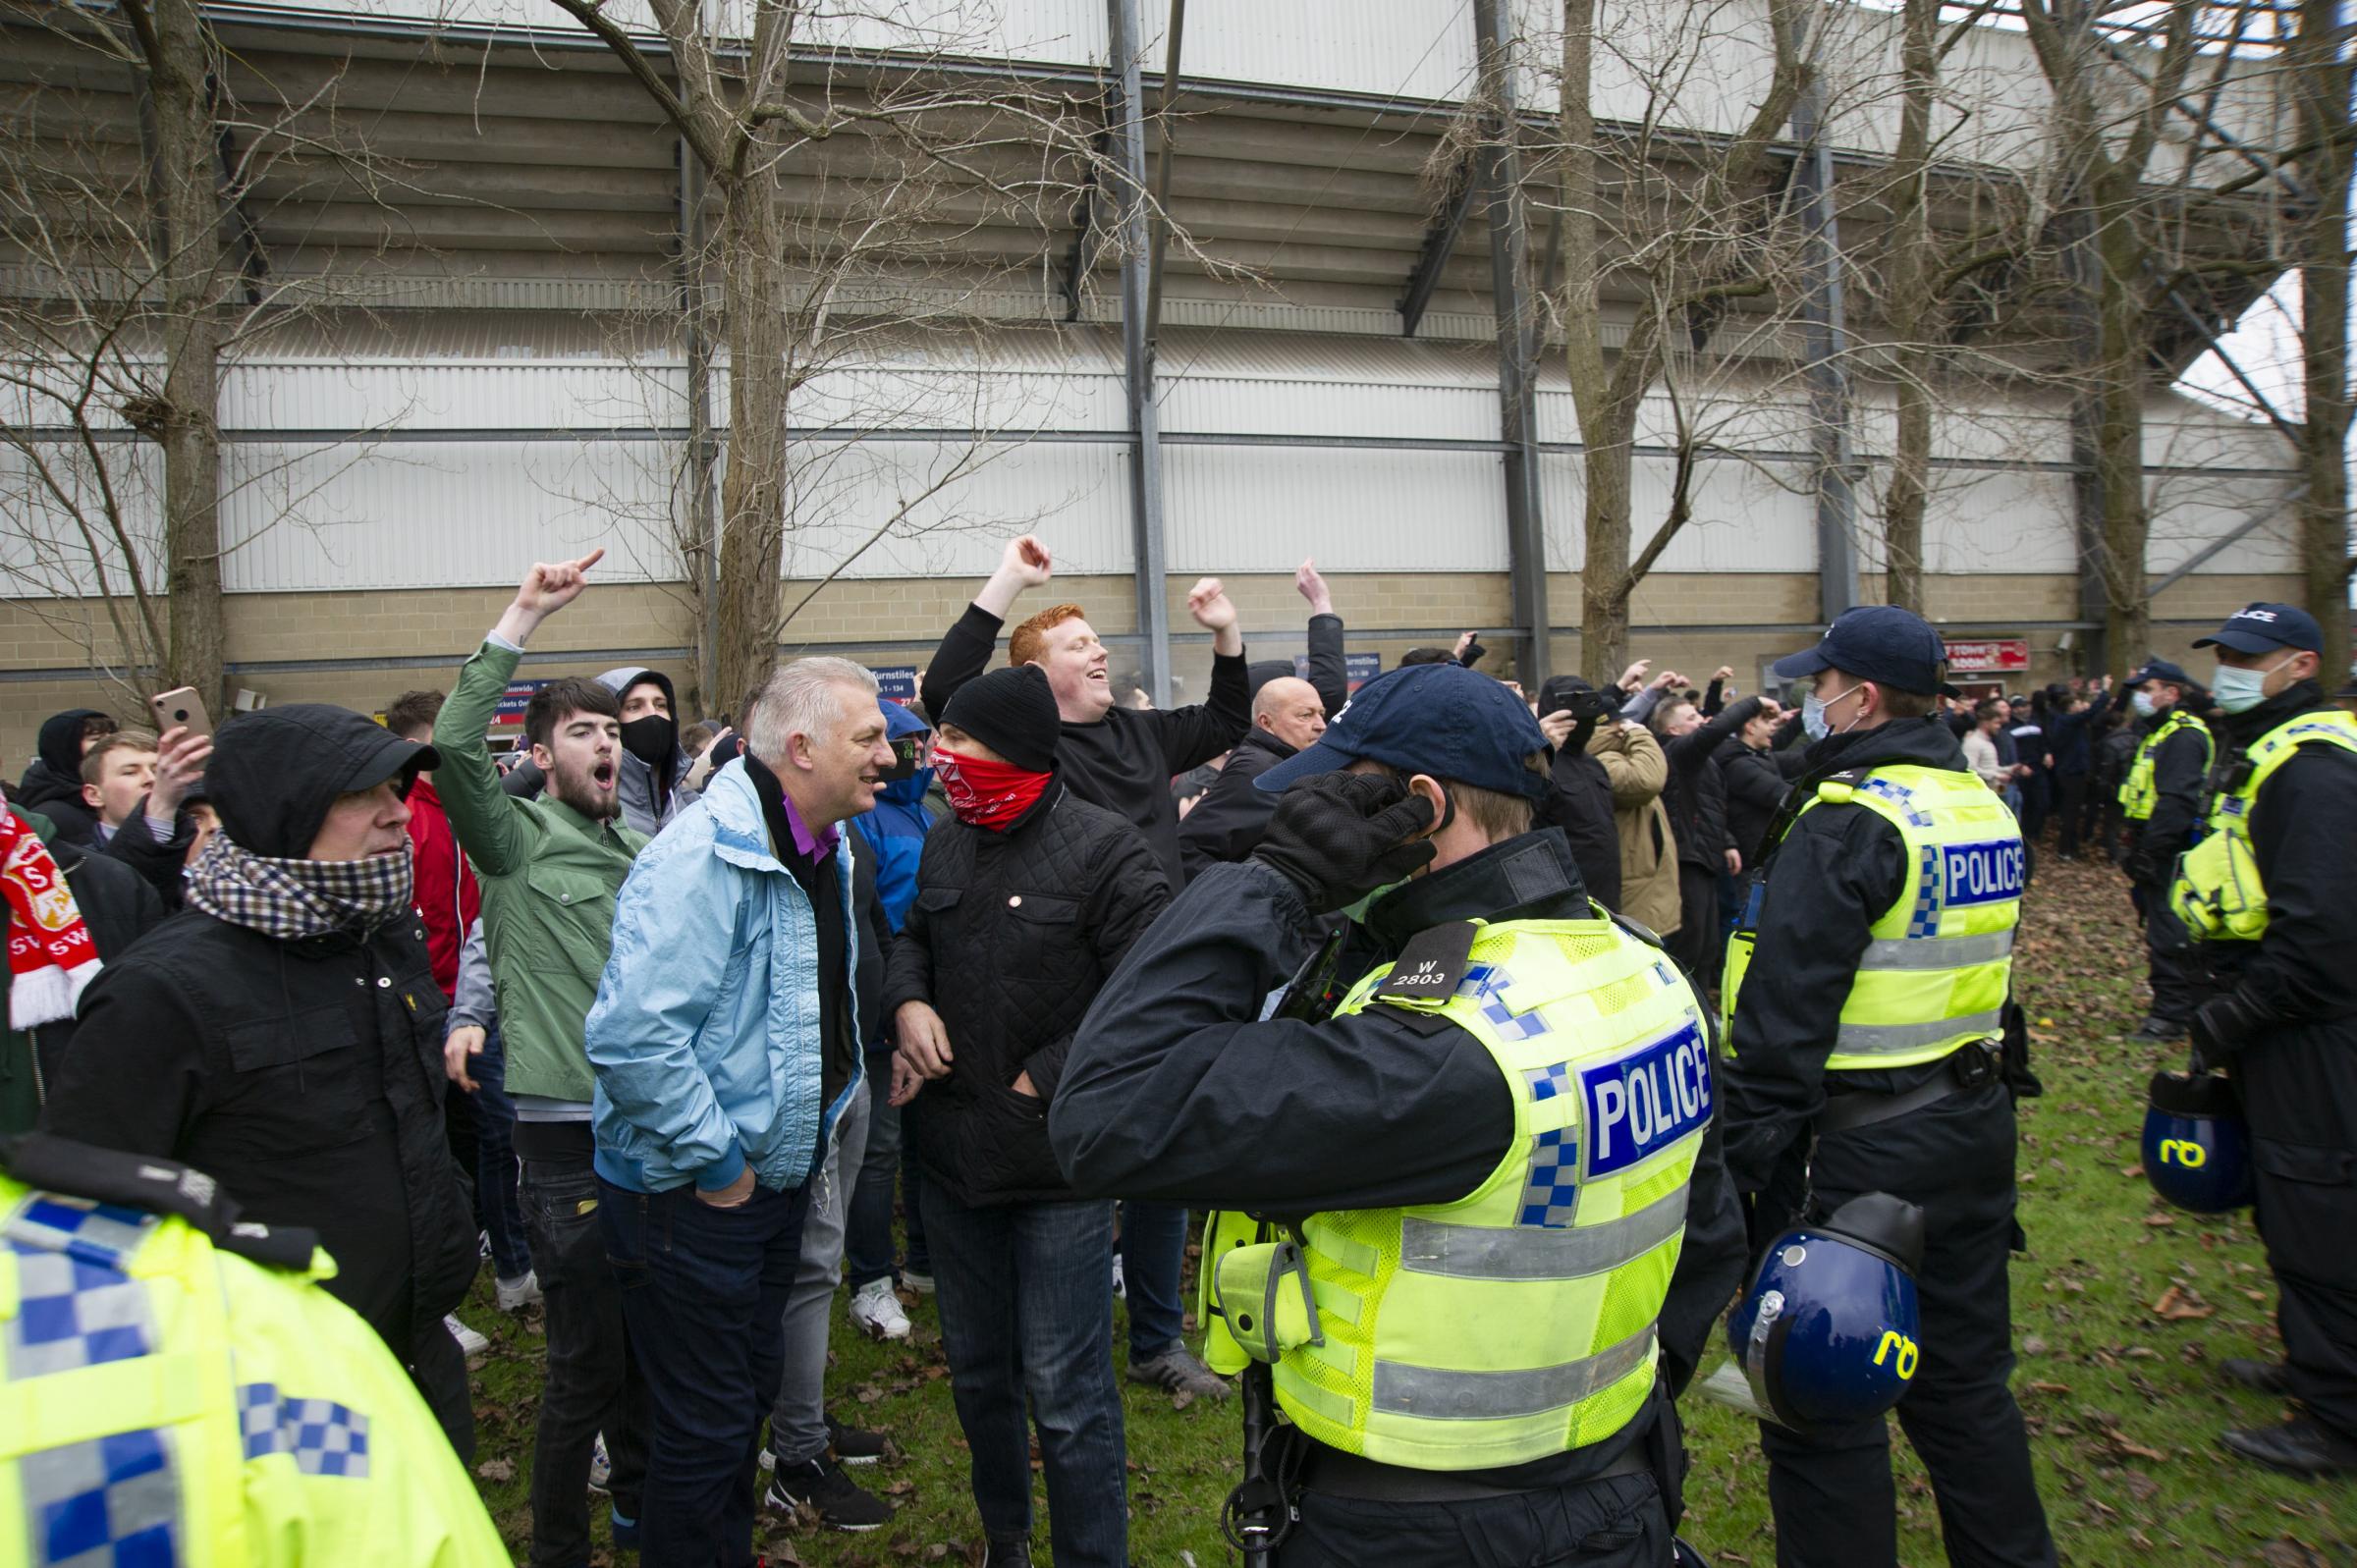 Bristol away fans arriving before the the game at STFC. Pic - gv Date 22/1/2022